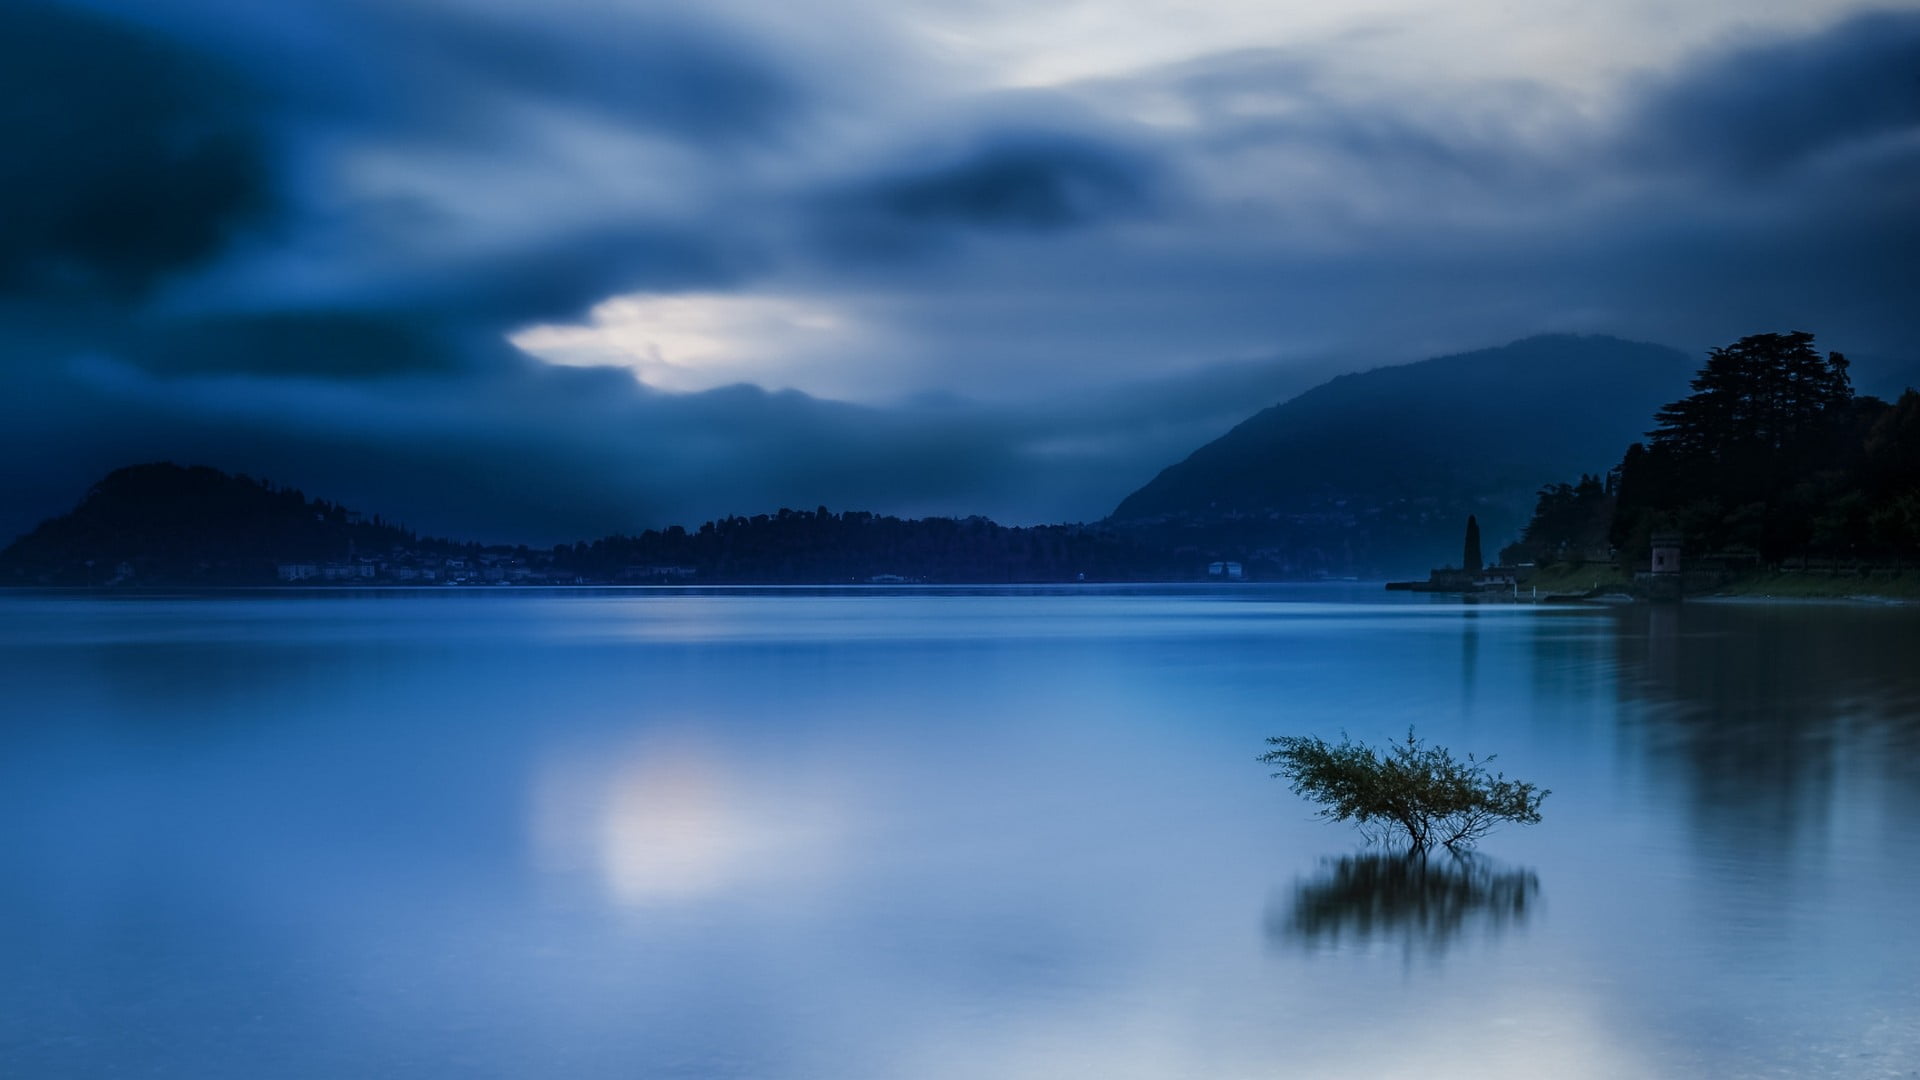 body of water, landscape, nature, blue, lake, Italy, mountains